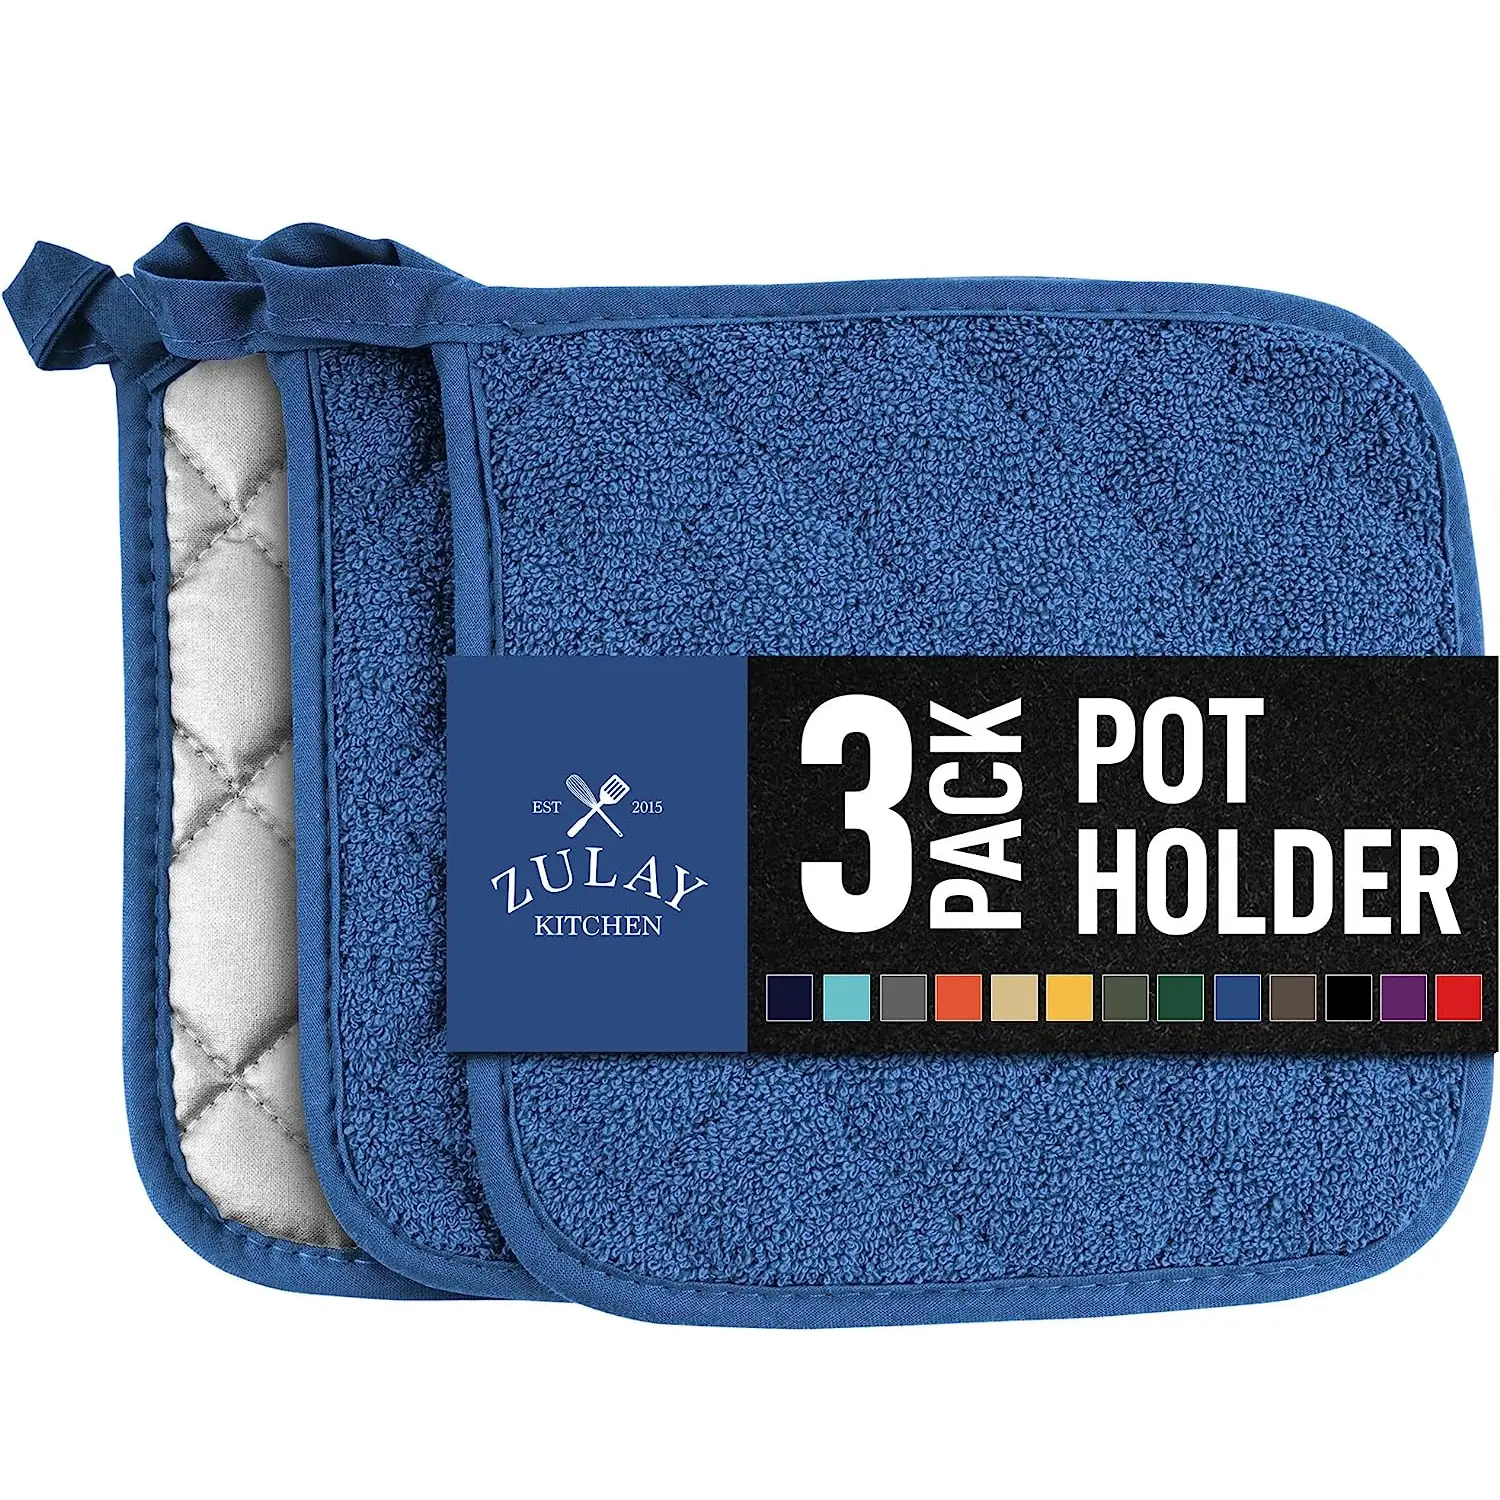 Zulay 6-Pack Pot Holders for Kitchen Heat Resistant Cotton